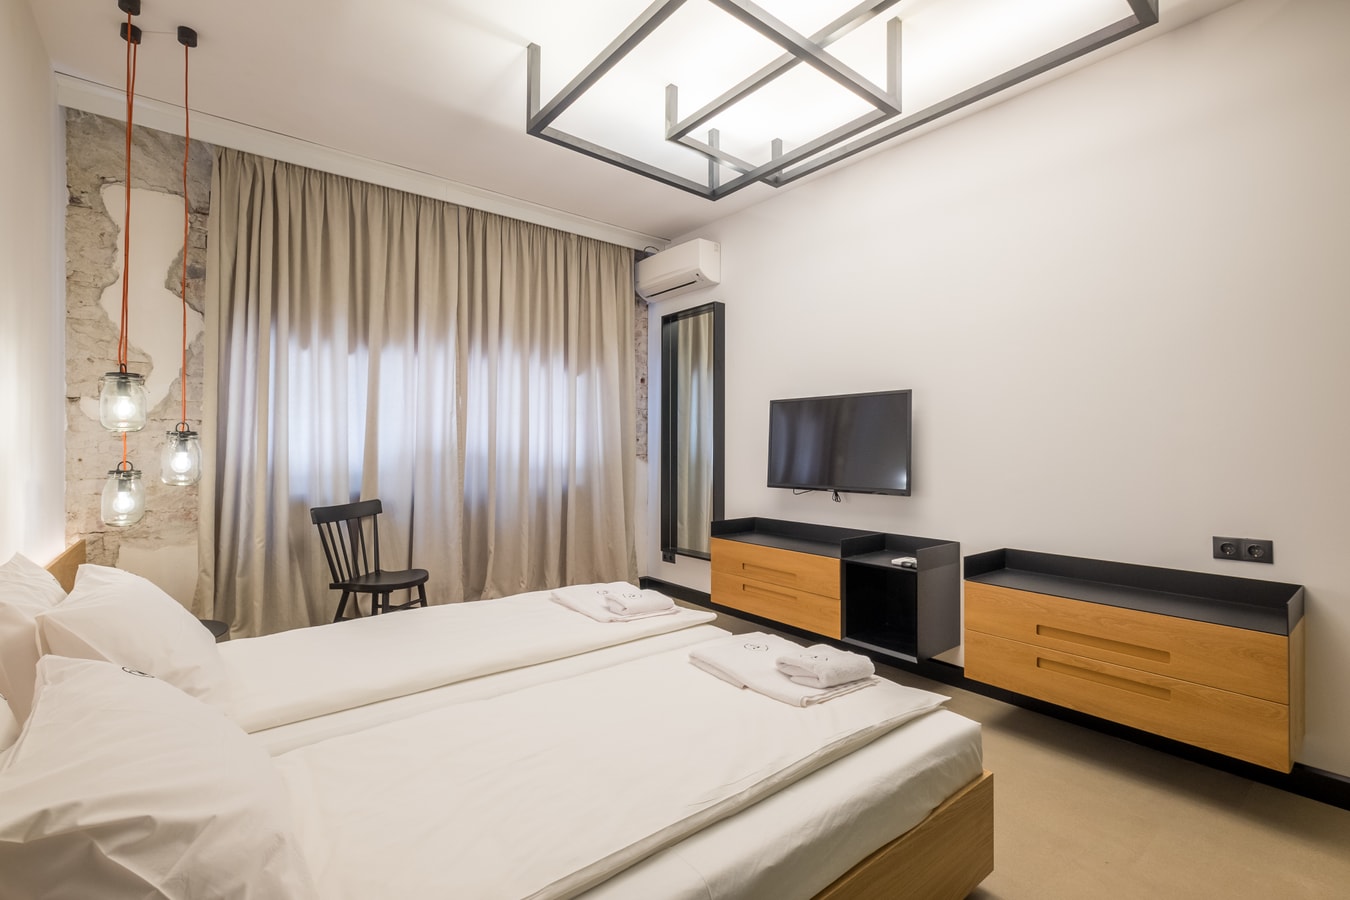 R34 Boutique Hotel - Deluxe Double Room №10 Flataway